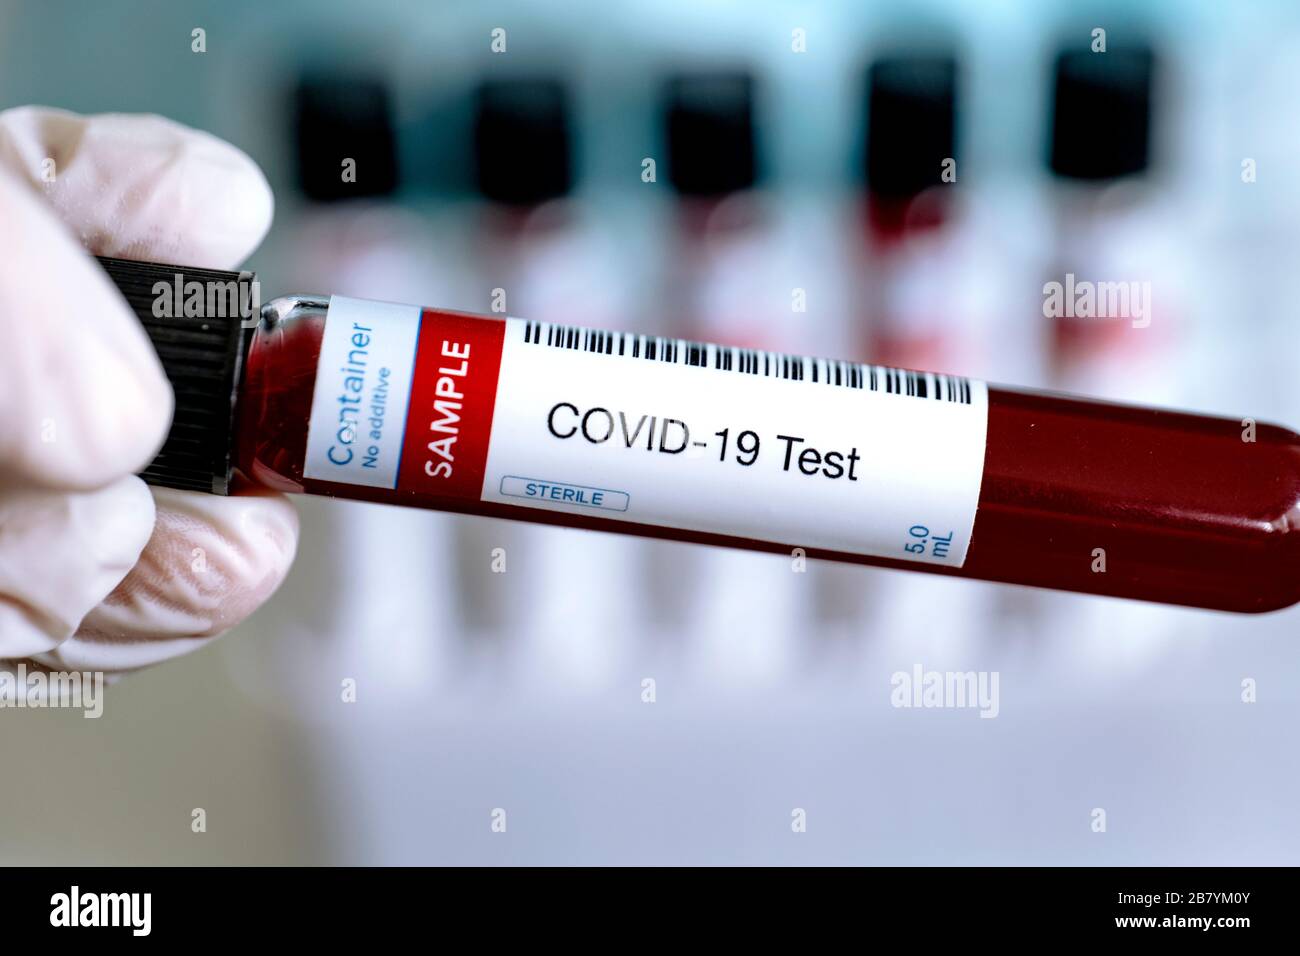 Testing for presence of coronavirus. Tube containing a blood sample for diagnosing COVID-19. Tubes in the background. Stock Photo